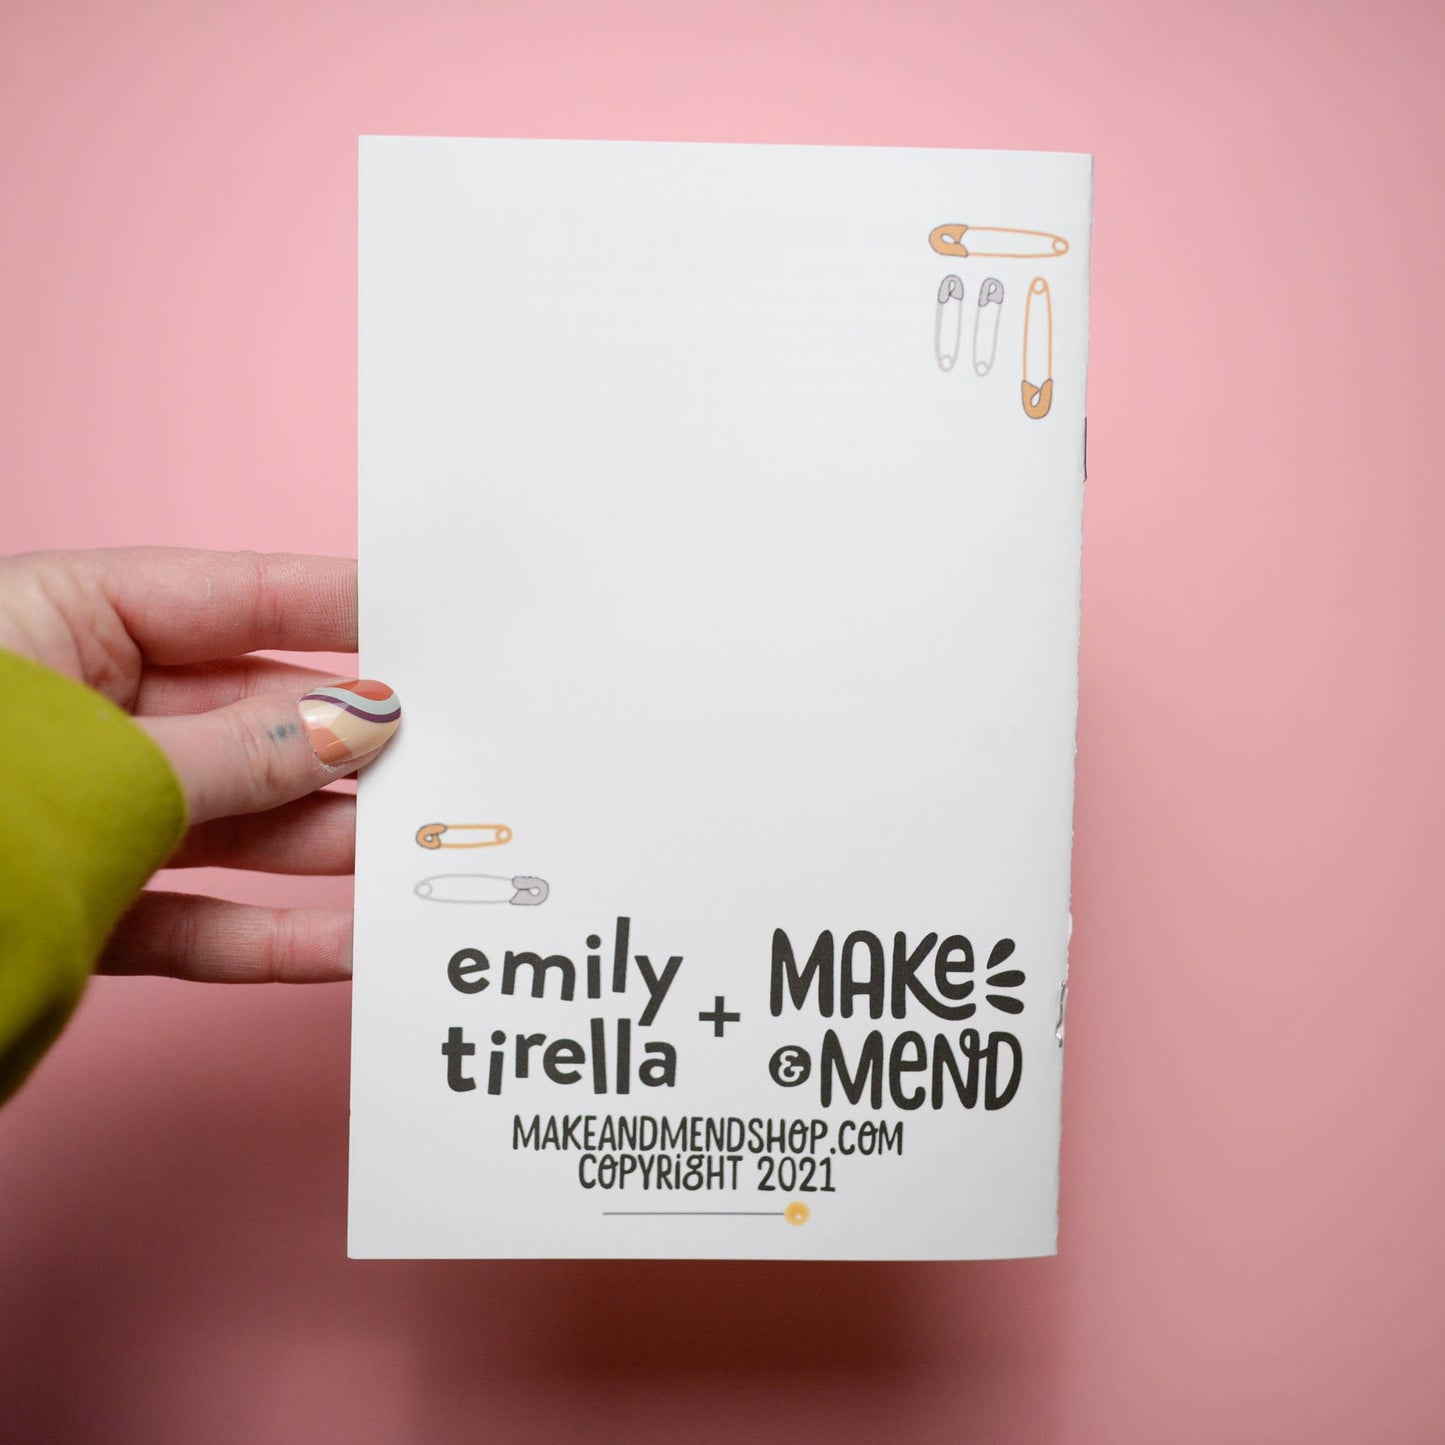 Make & Mend - 'Mend  + Repair Your Clothing by Hand' Zine